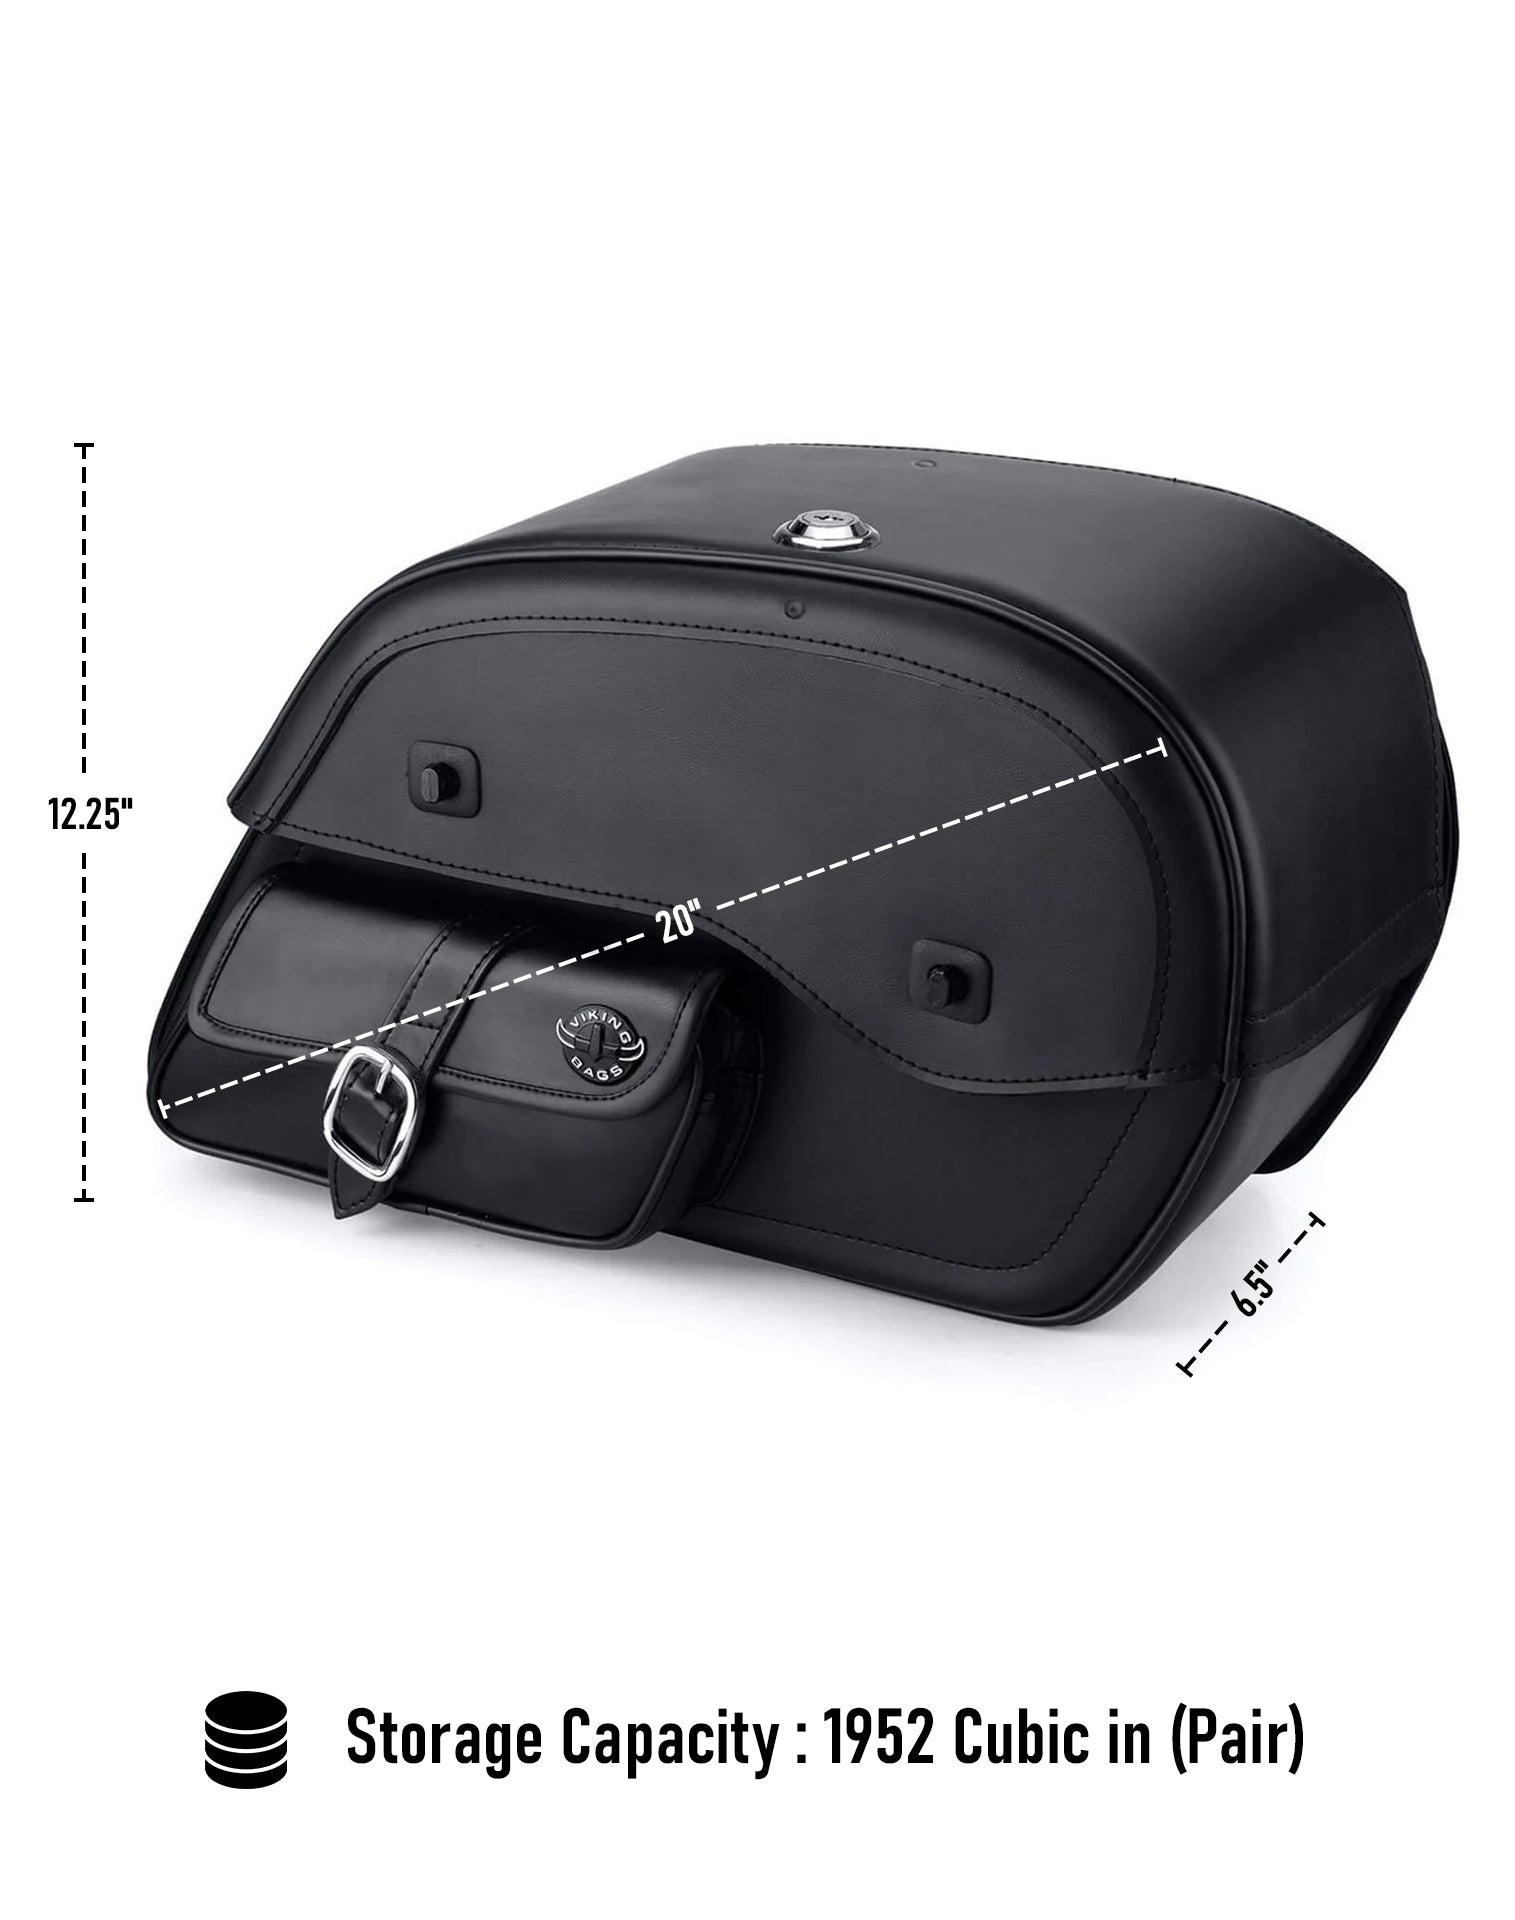 Viking Essential Side Pocket Large Leather Motorcycle Saddlebags For Harley Softail Low Rider St Fxlrst Can Store Your Ridings Gears